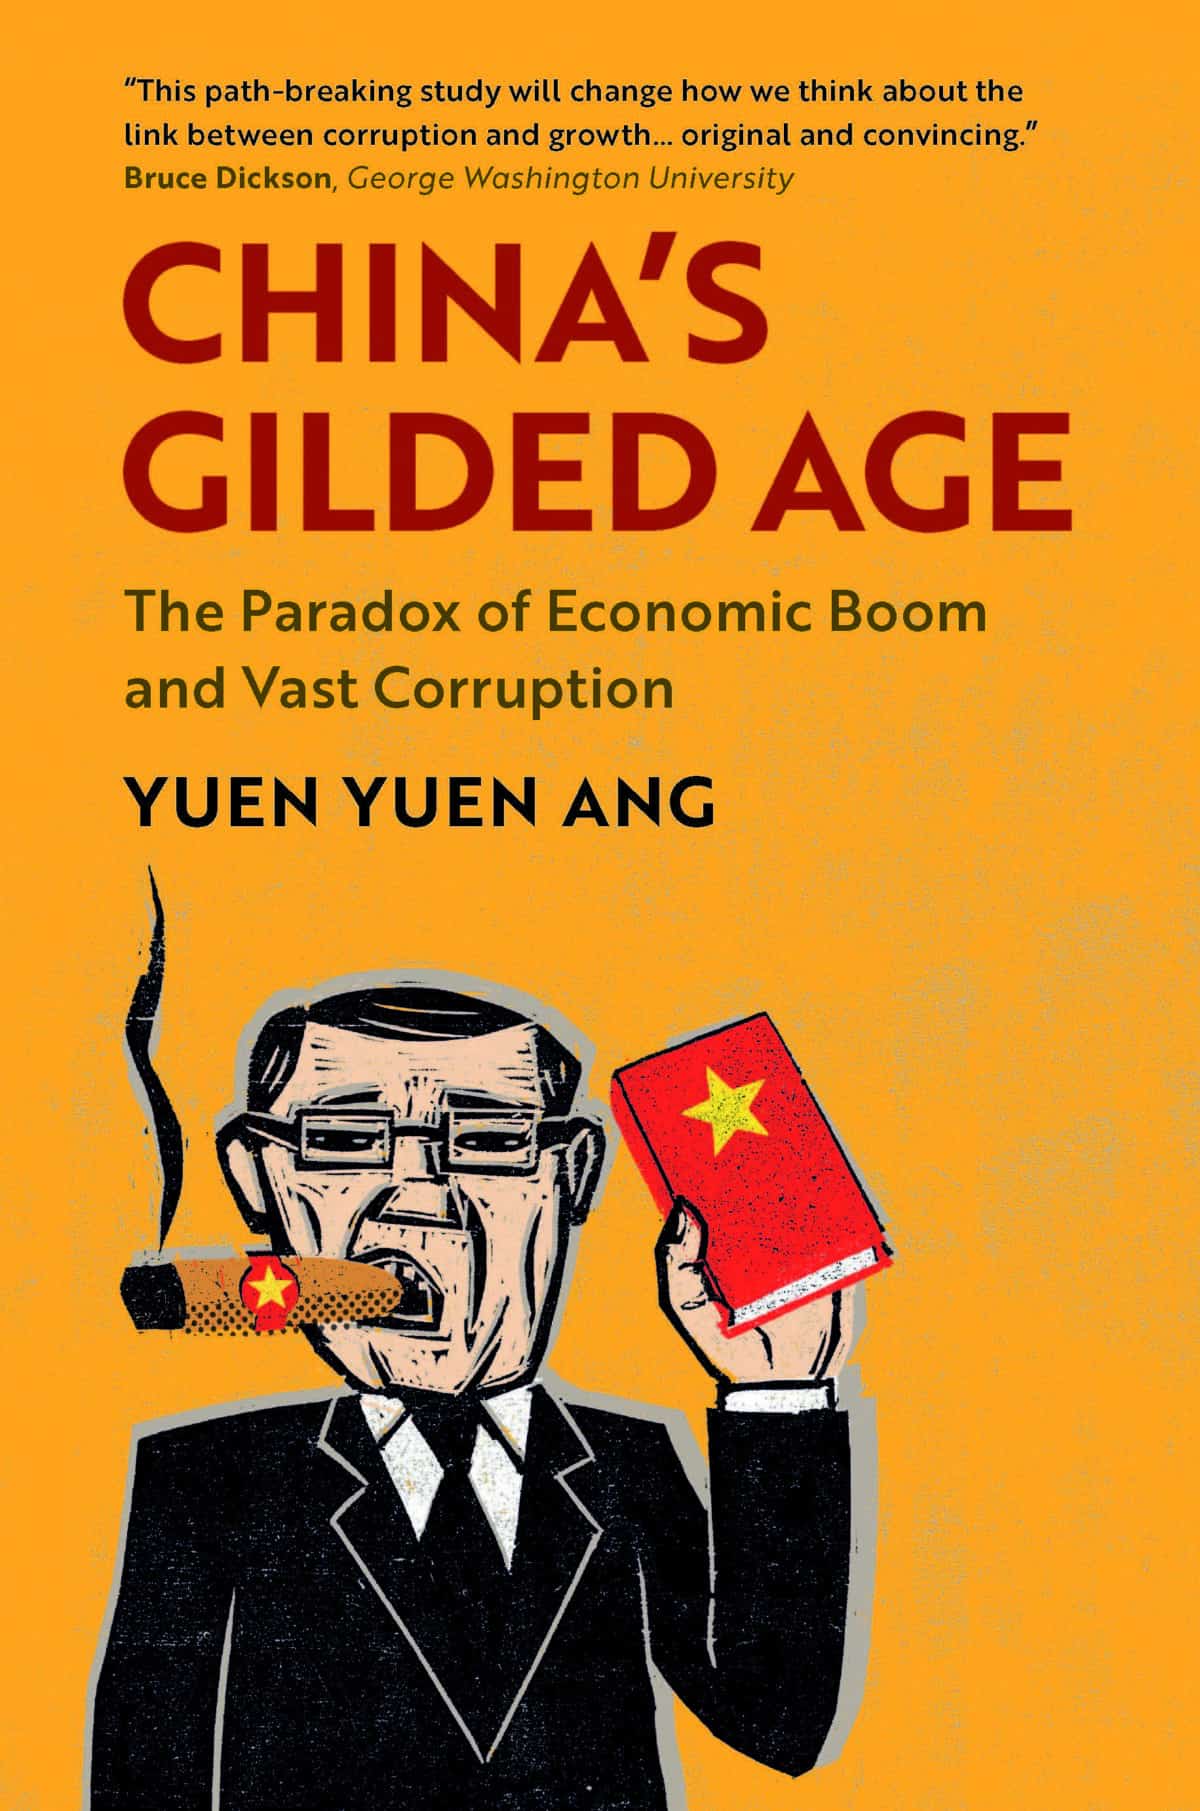 How China Escaped the Poverty Trap by Yuen Yuen Ang